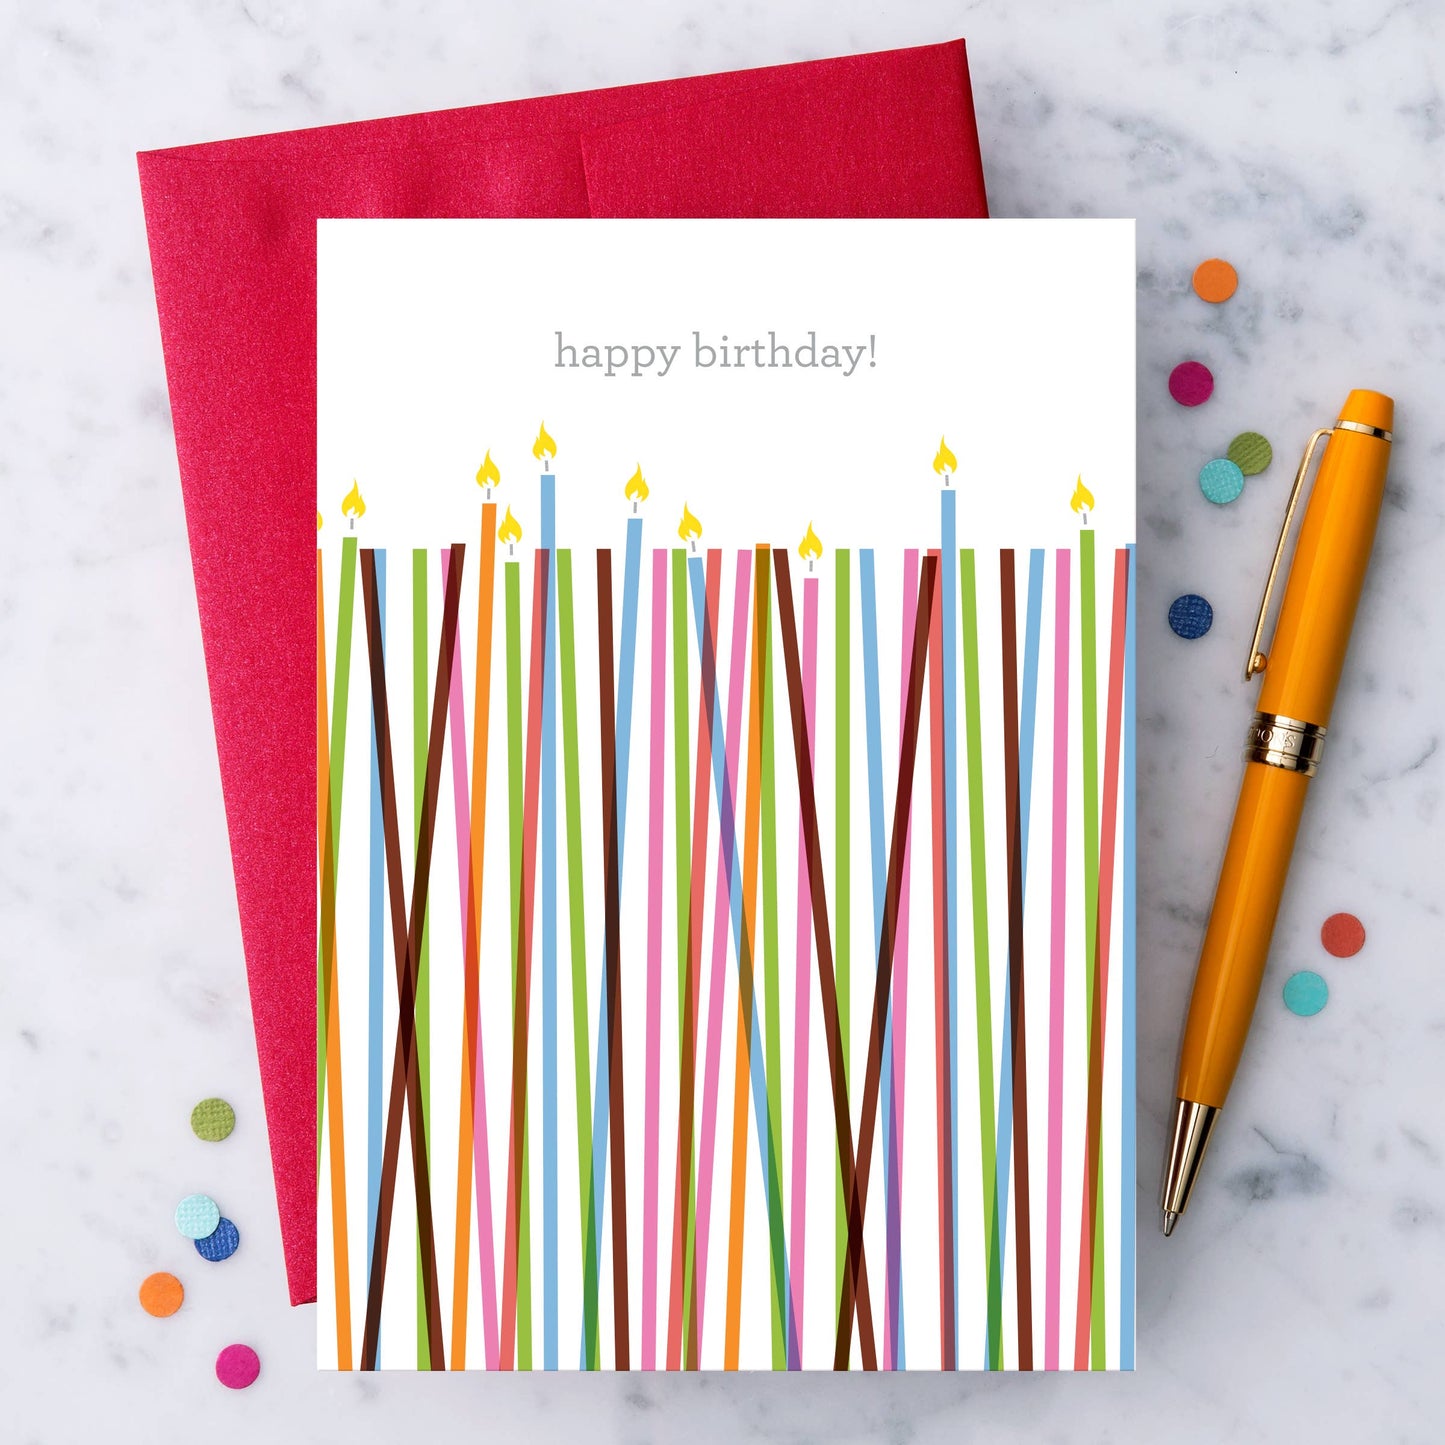 Design With Heart -"Happy Birthday” candles greeting card